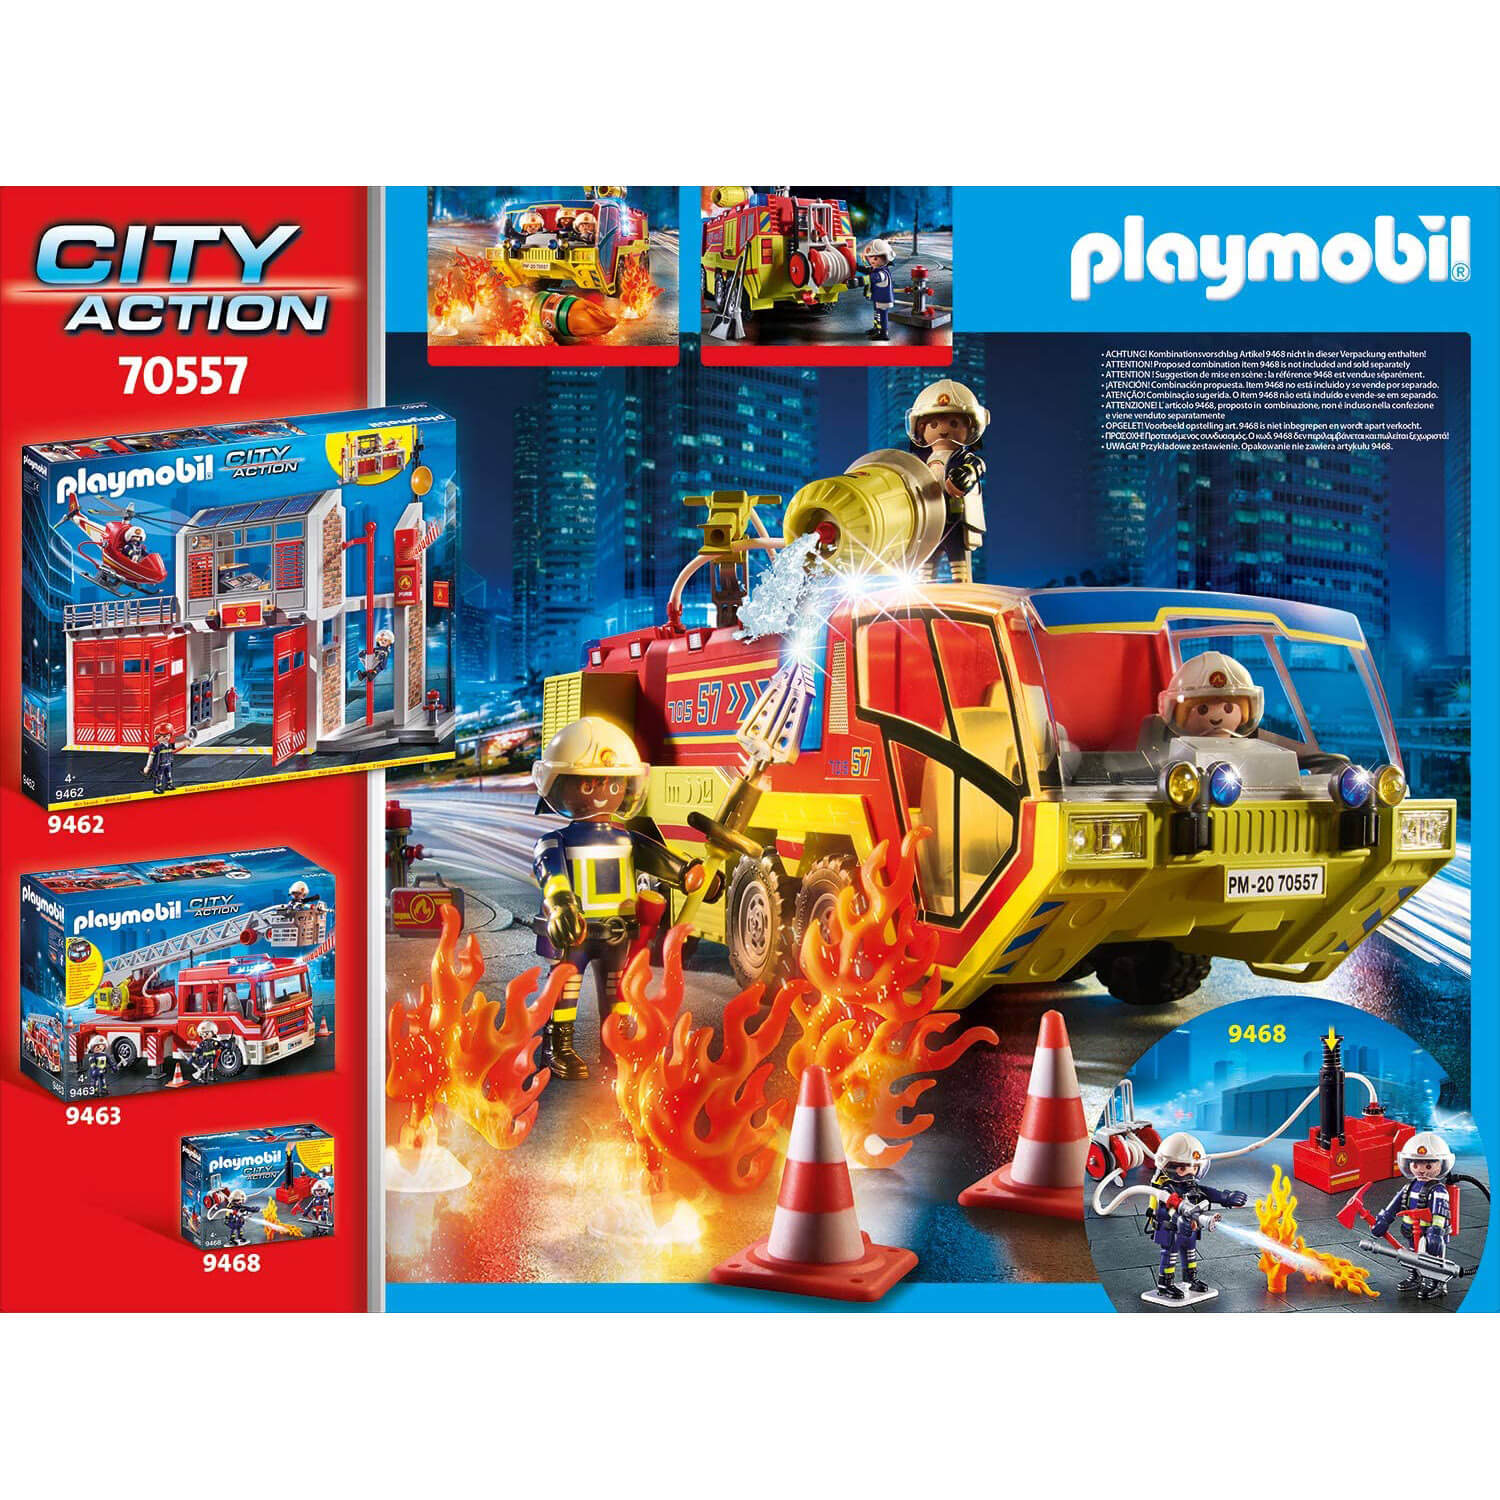 PLAYMOBIL Fire Engine with Truck (70557)